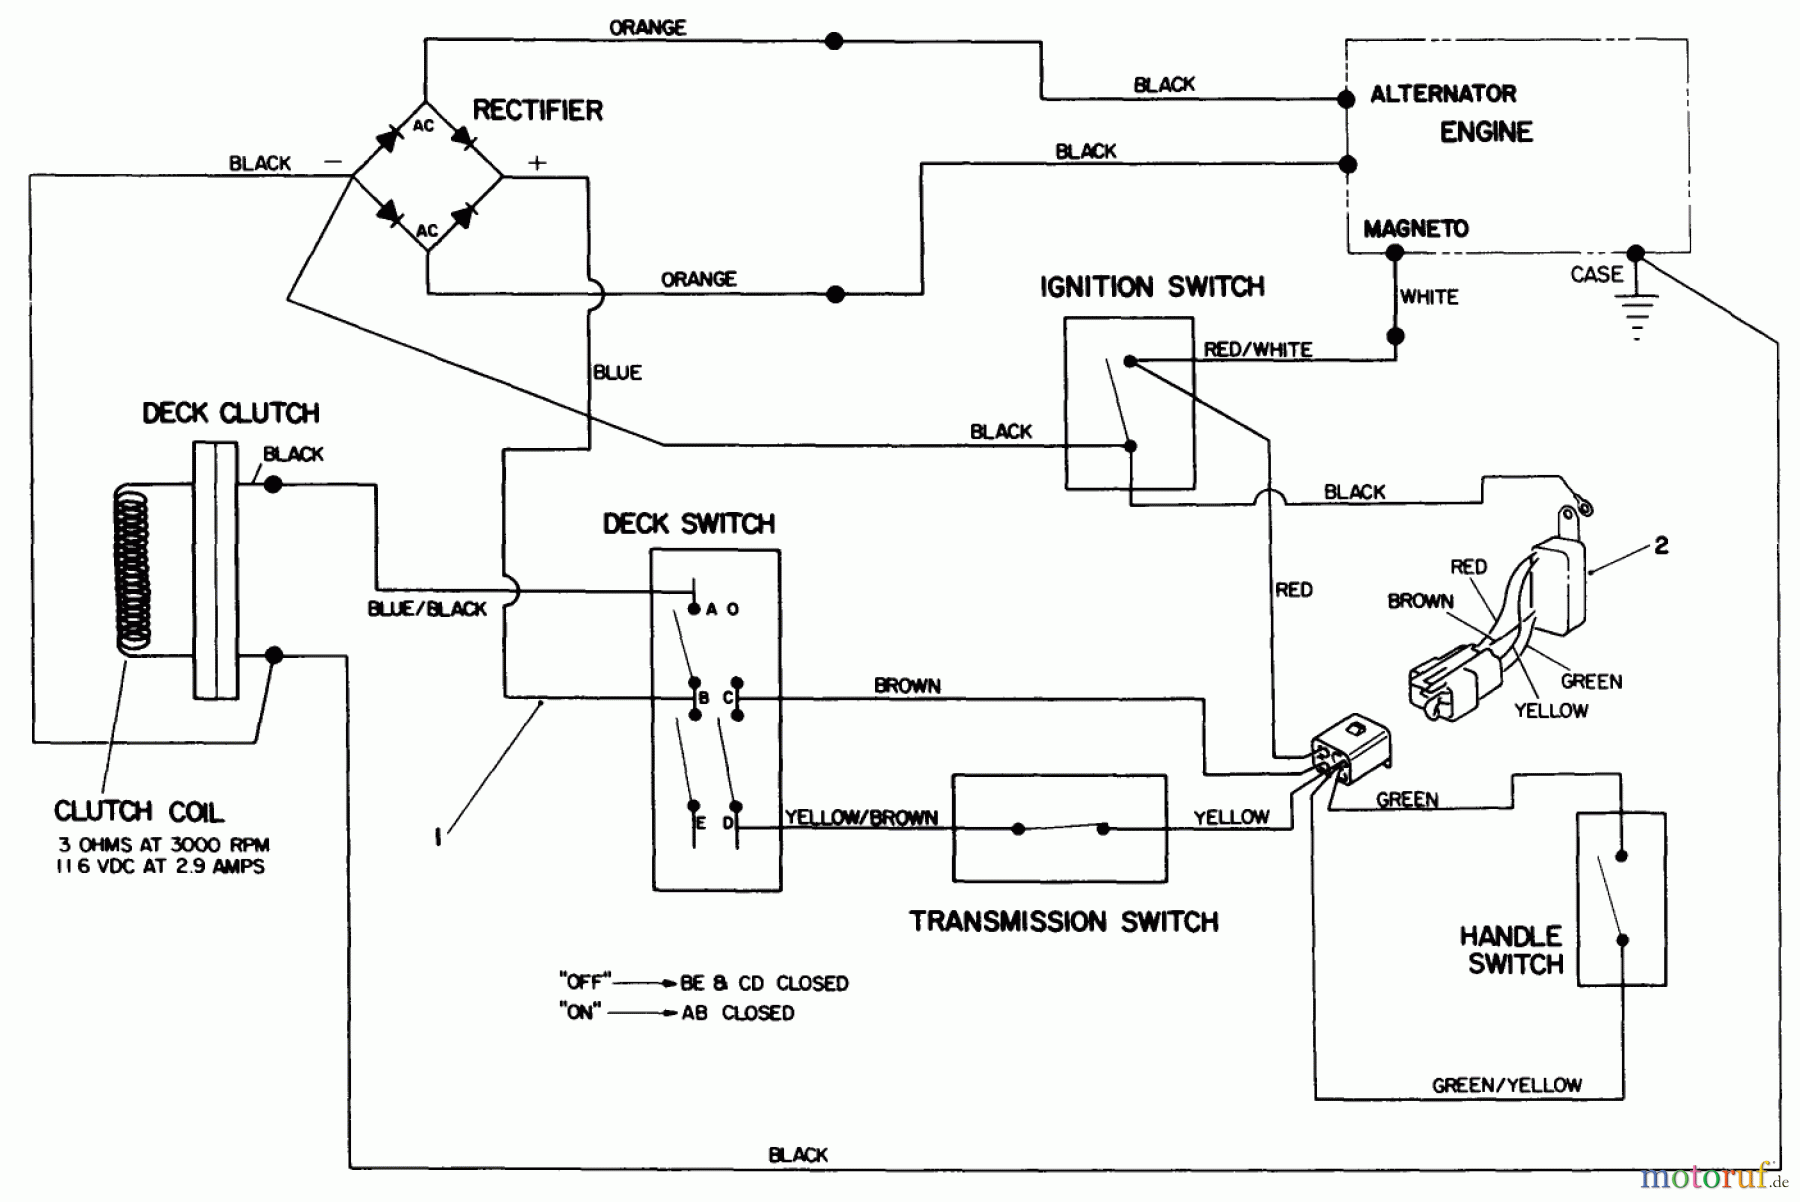  Toro Neu Mowers, Drive Unit Only 30115 - Toro Mid-Size Proline Gear Traction Unit, 12.5 hp, 1989 (9000001-9999999) ELECTRICAL SCHEMATIC